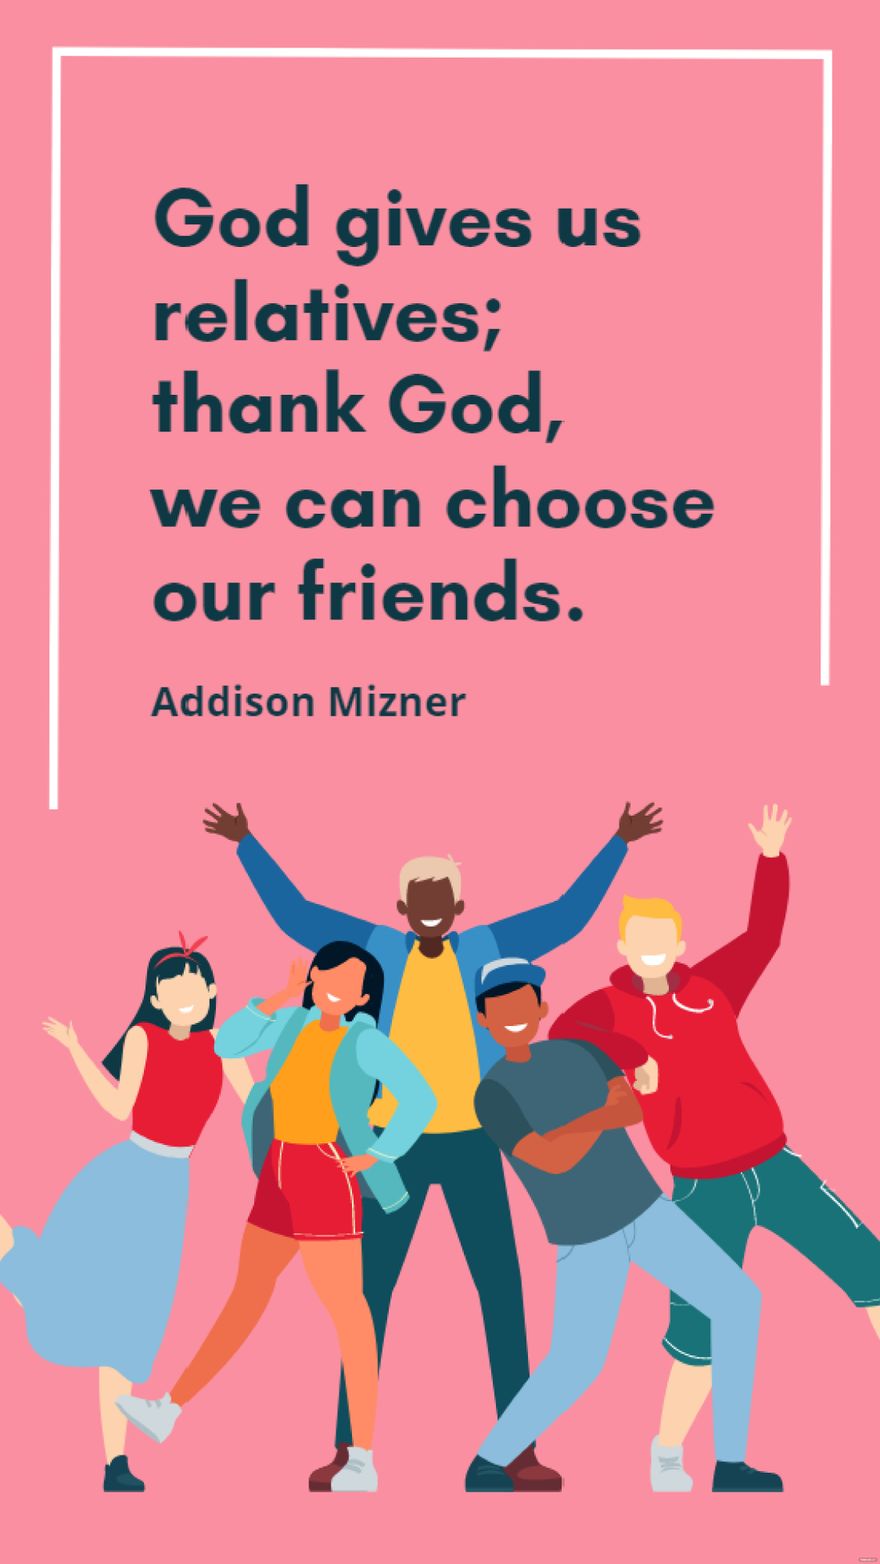 Addison Mizner - God gives us relatives; thank God, we can choose our friends.